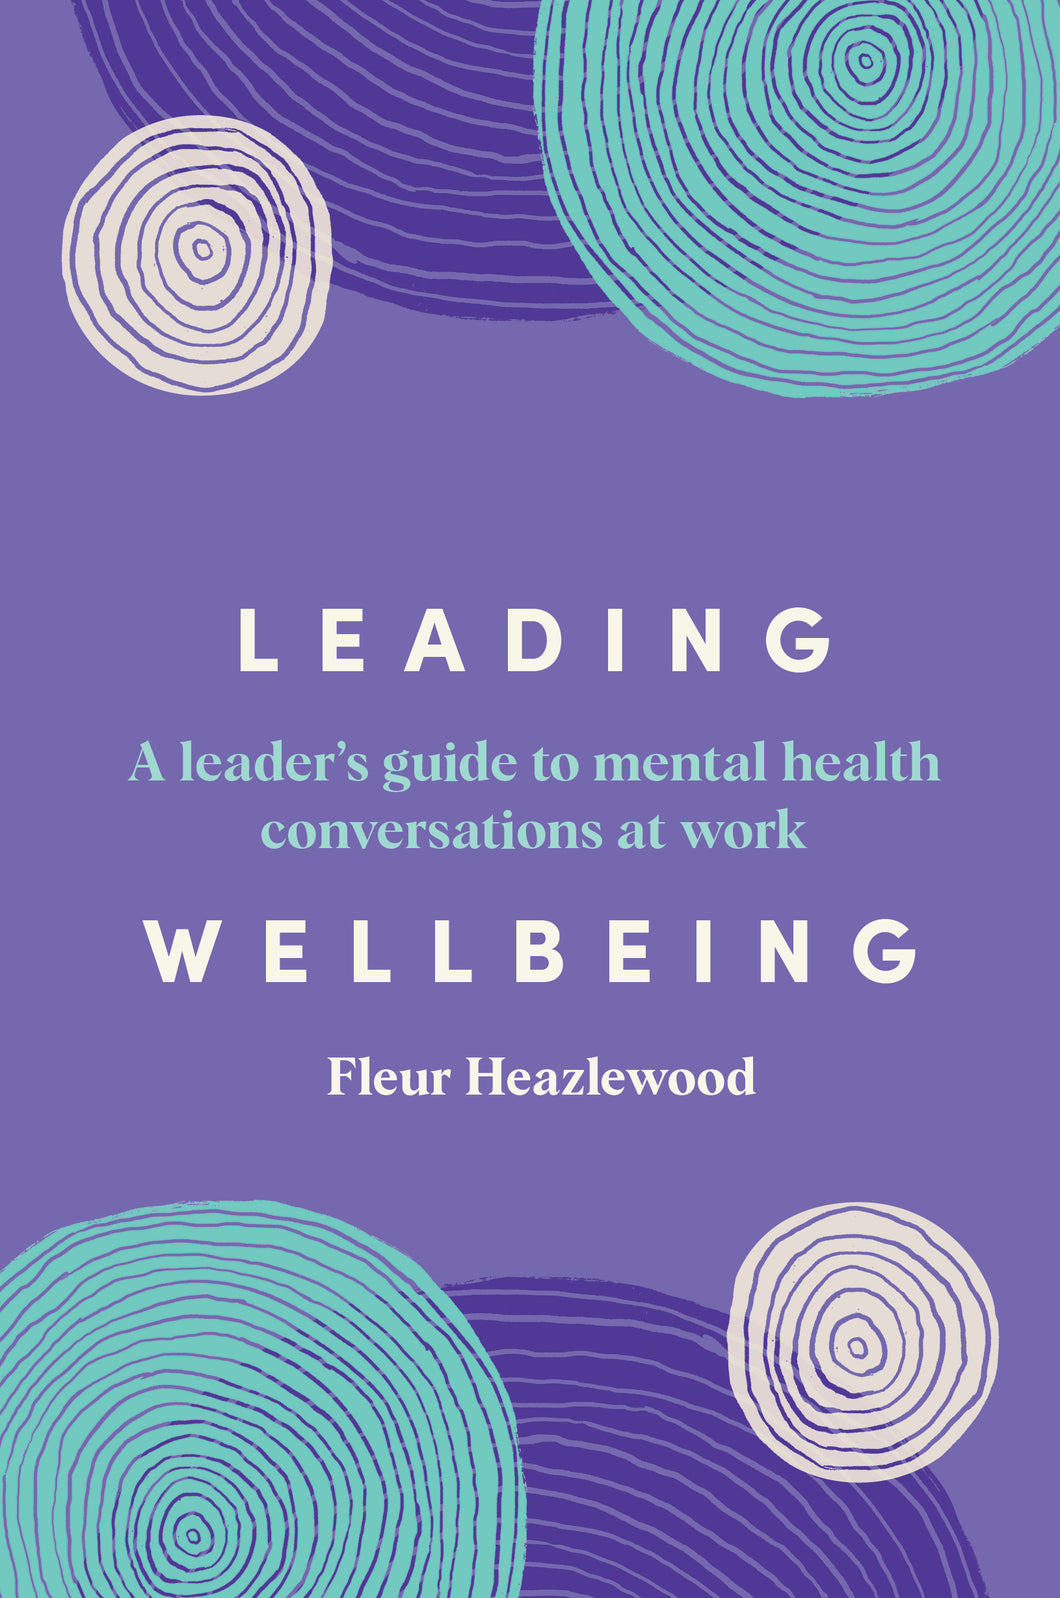 Leading Wellbeing: A leader’s guide to mental health conversations at work <br><i><small> by Fleur Heazlewood </i> </small>